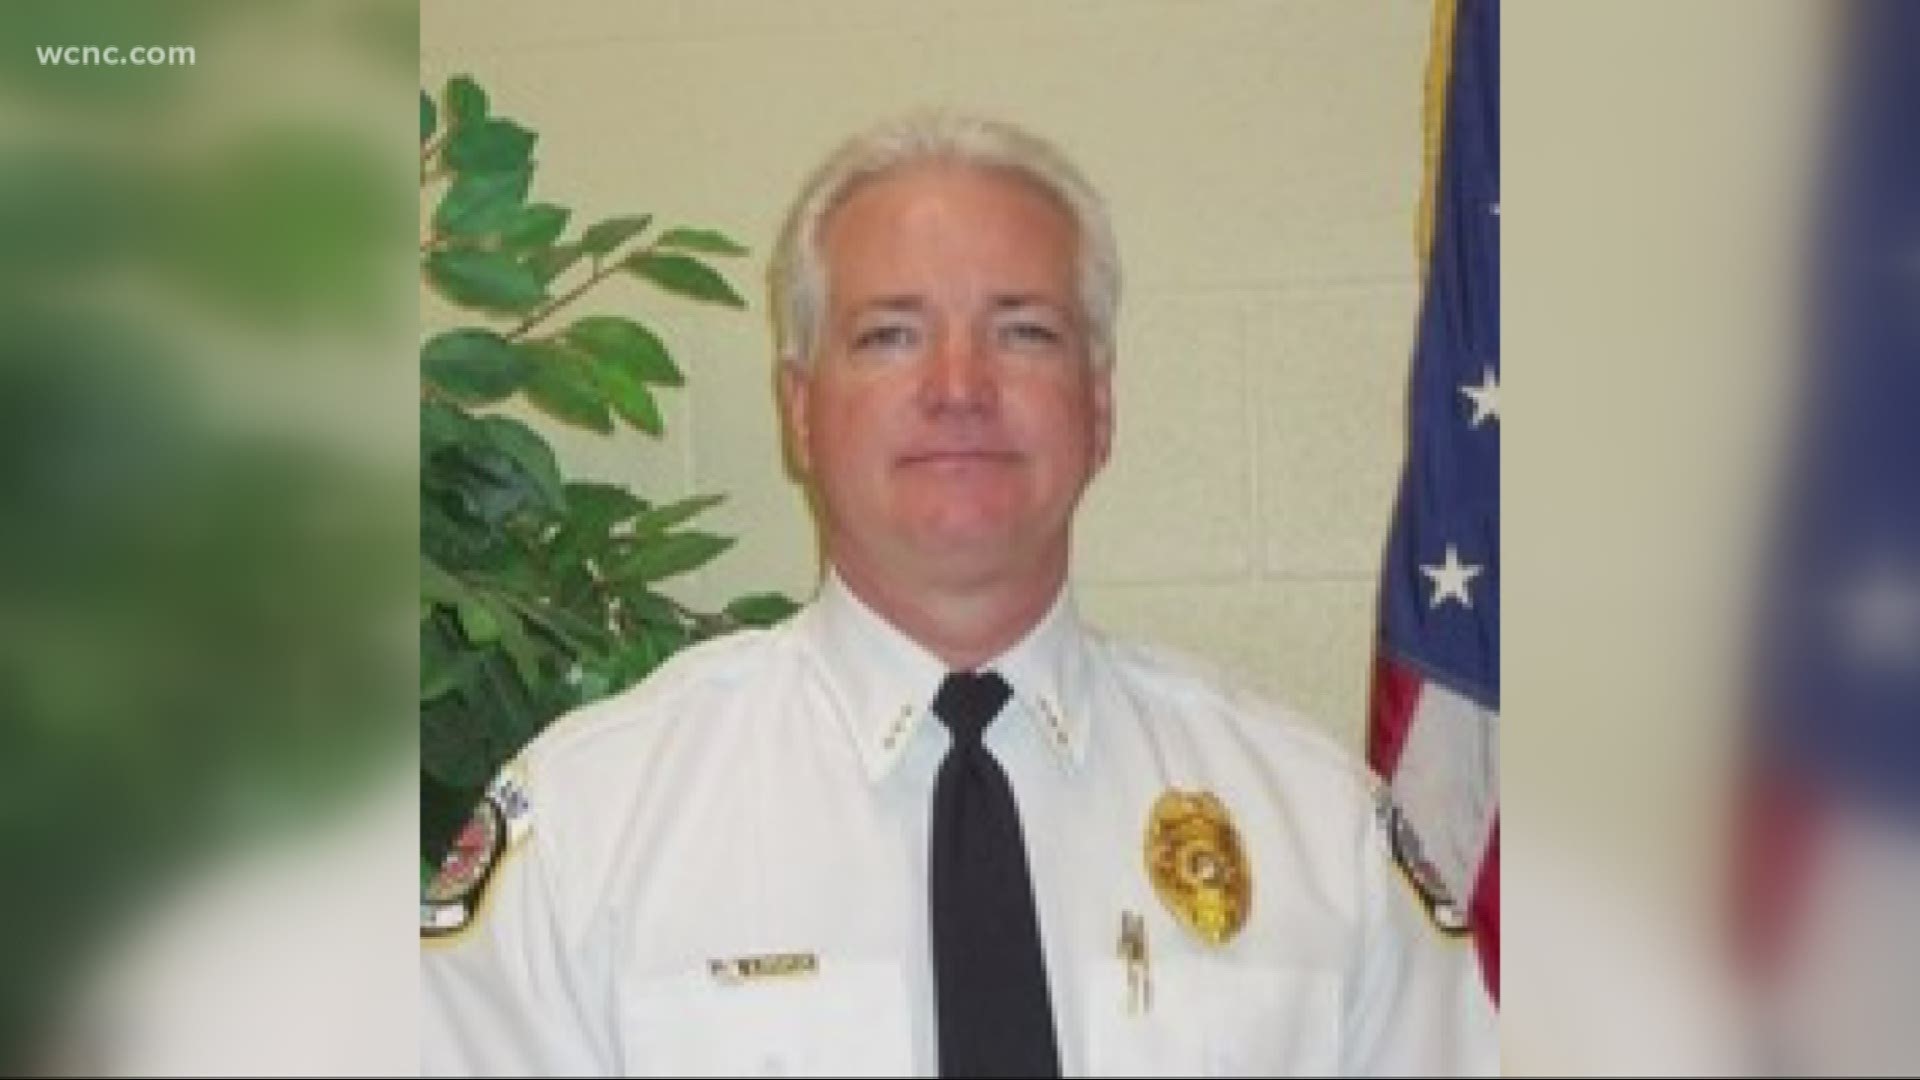 Pageland, South Carolina’s Police Chief Craig Greenlee was diagnosed with COVID-19. When he noticed symptoms, he self-quarantined on March 27.